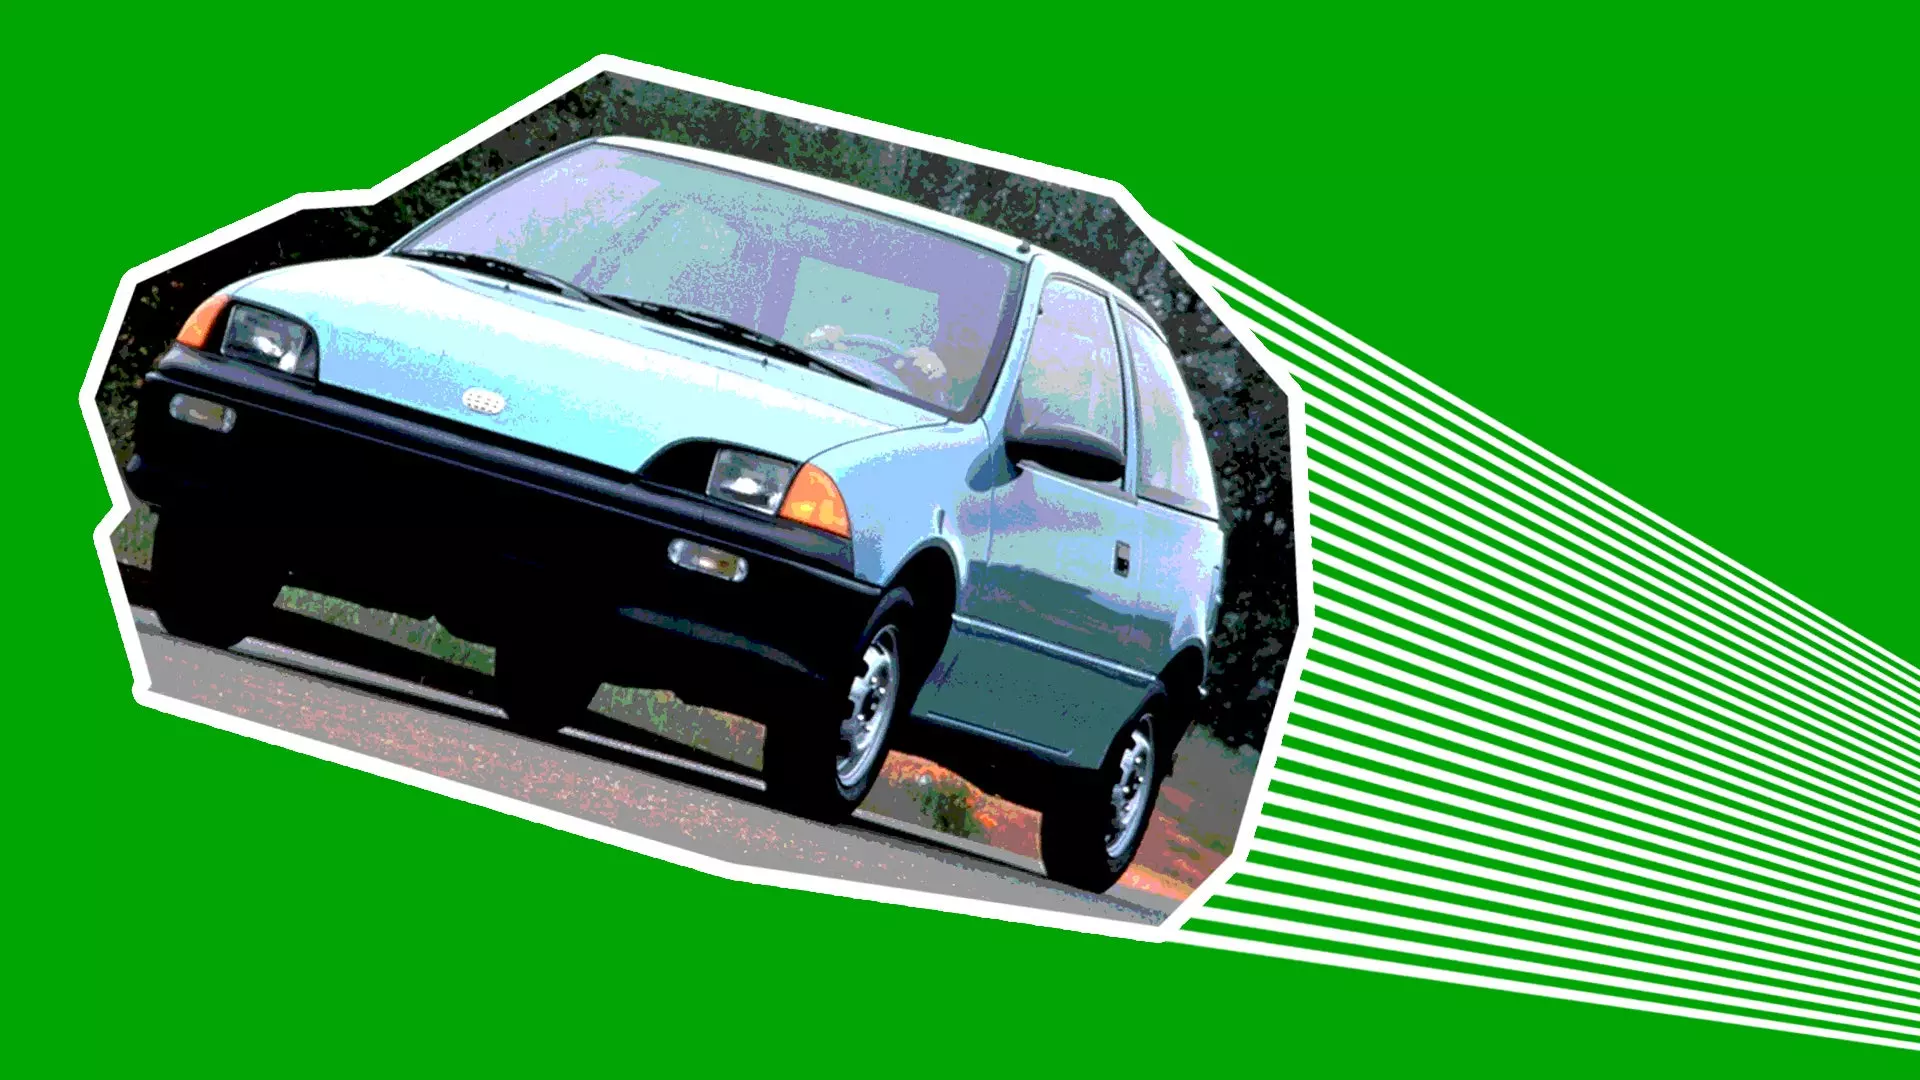 The Geo Metro XFi Is a Legend in the Pursuit of Efficient Ecomodding